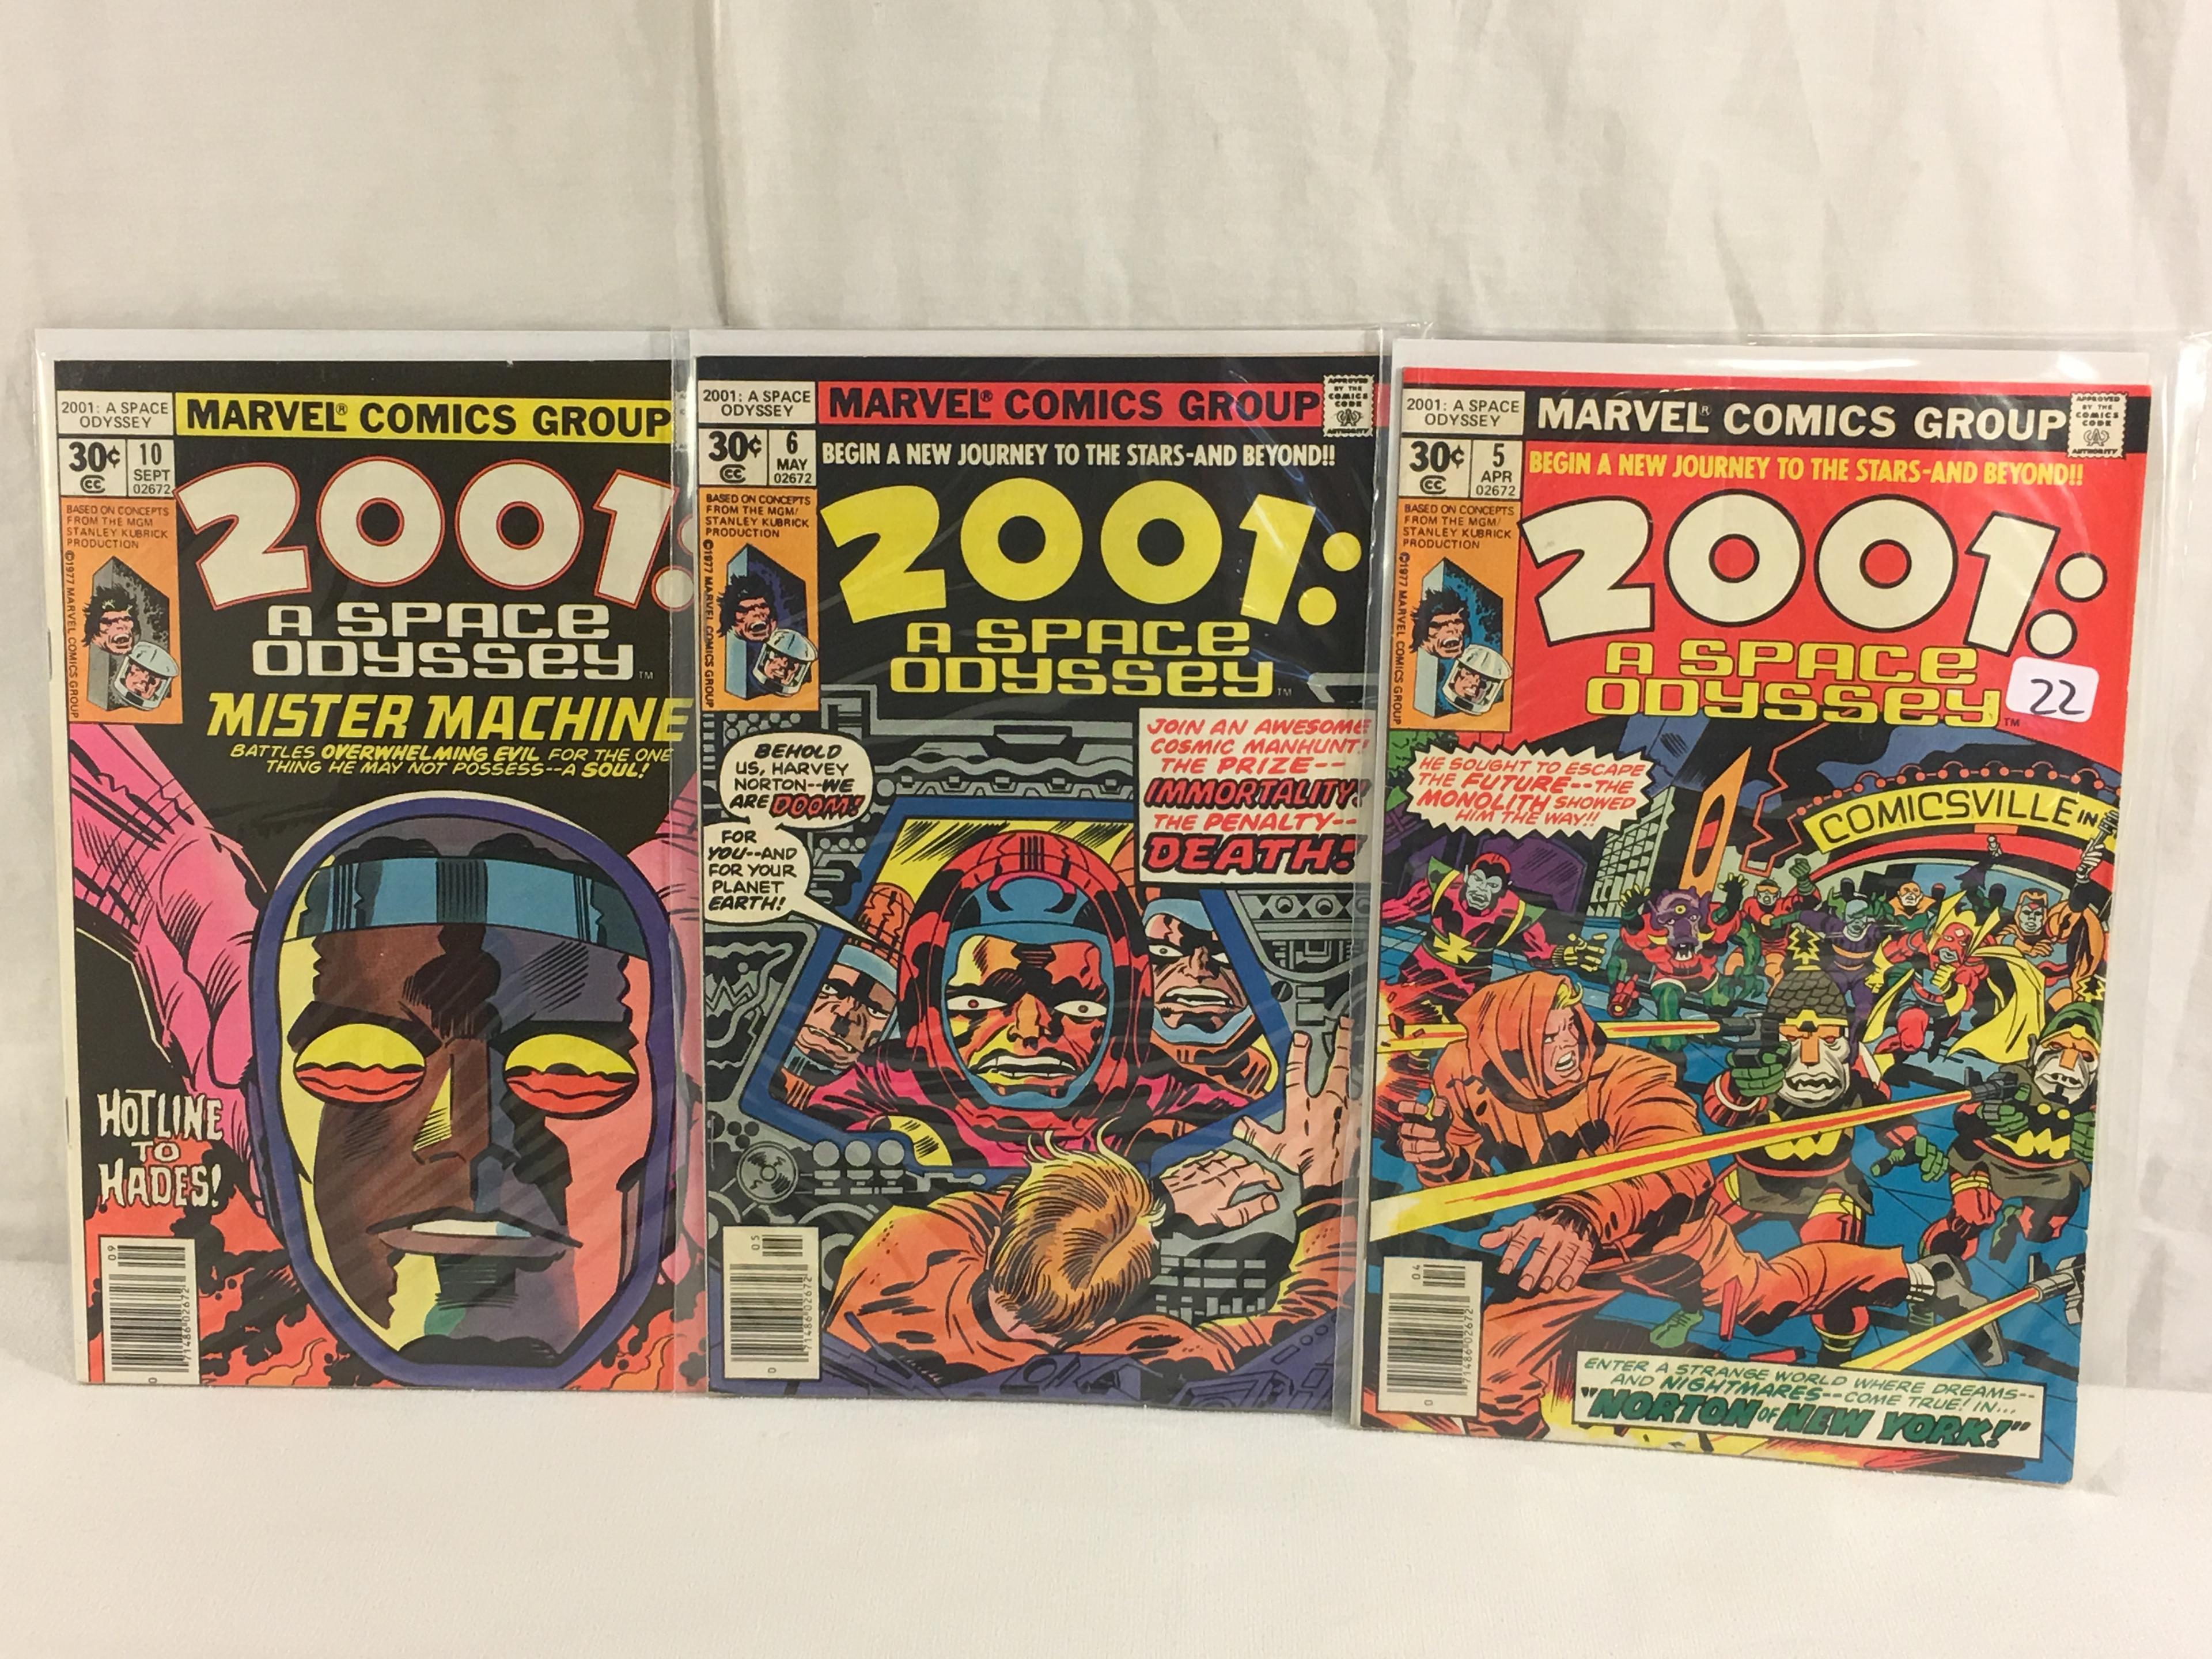 Lot of 3 Pcs Collector Vintage Marvel Comics 2001 A Space Odyssey Comic Books No.5.6.10.